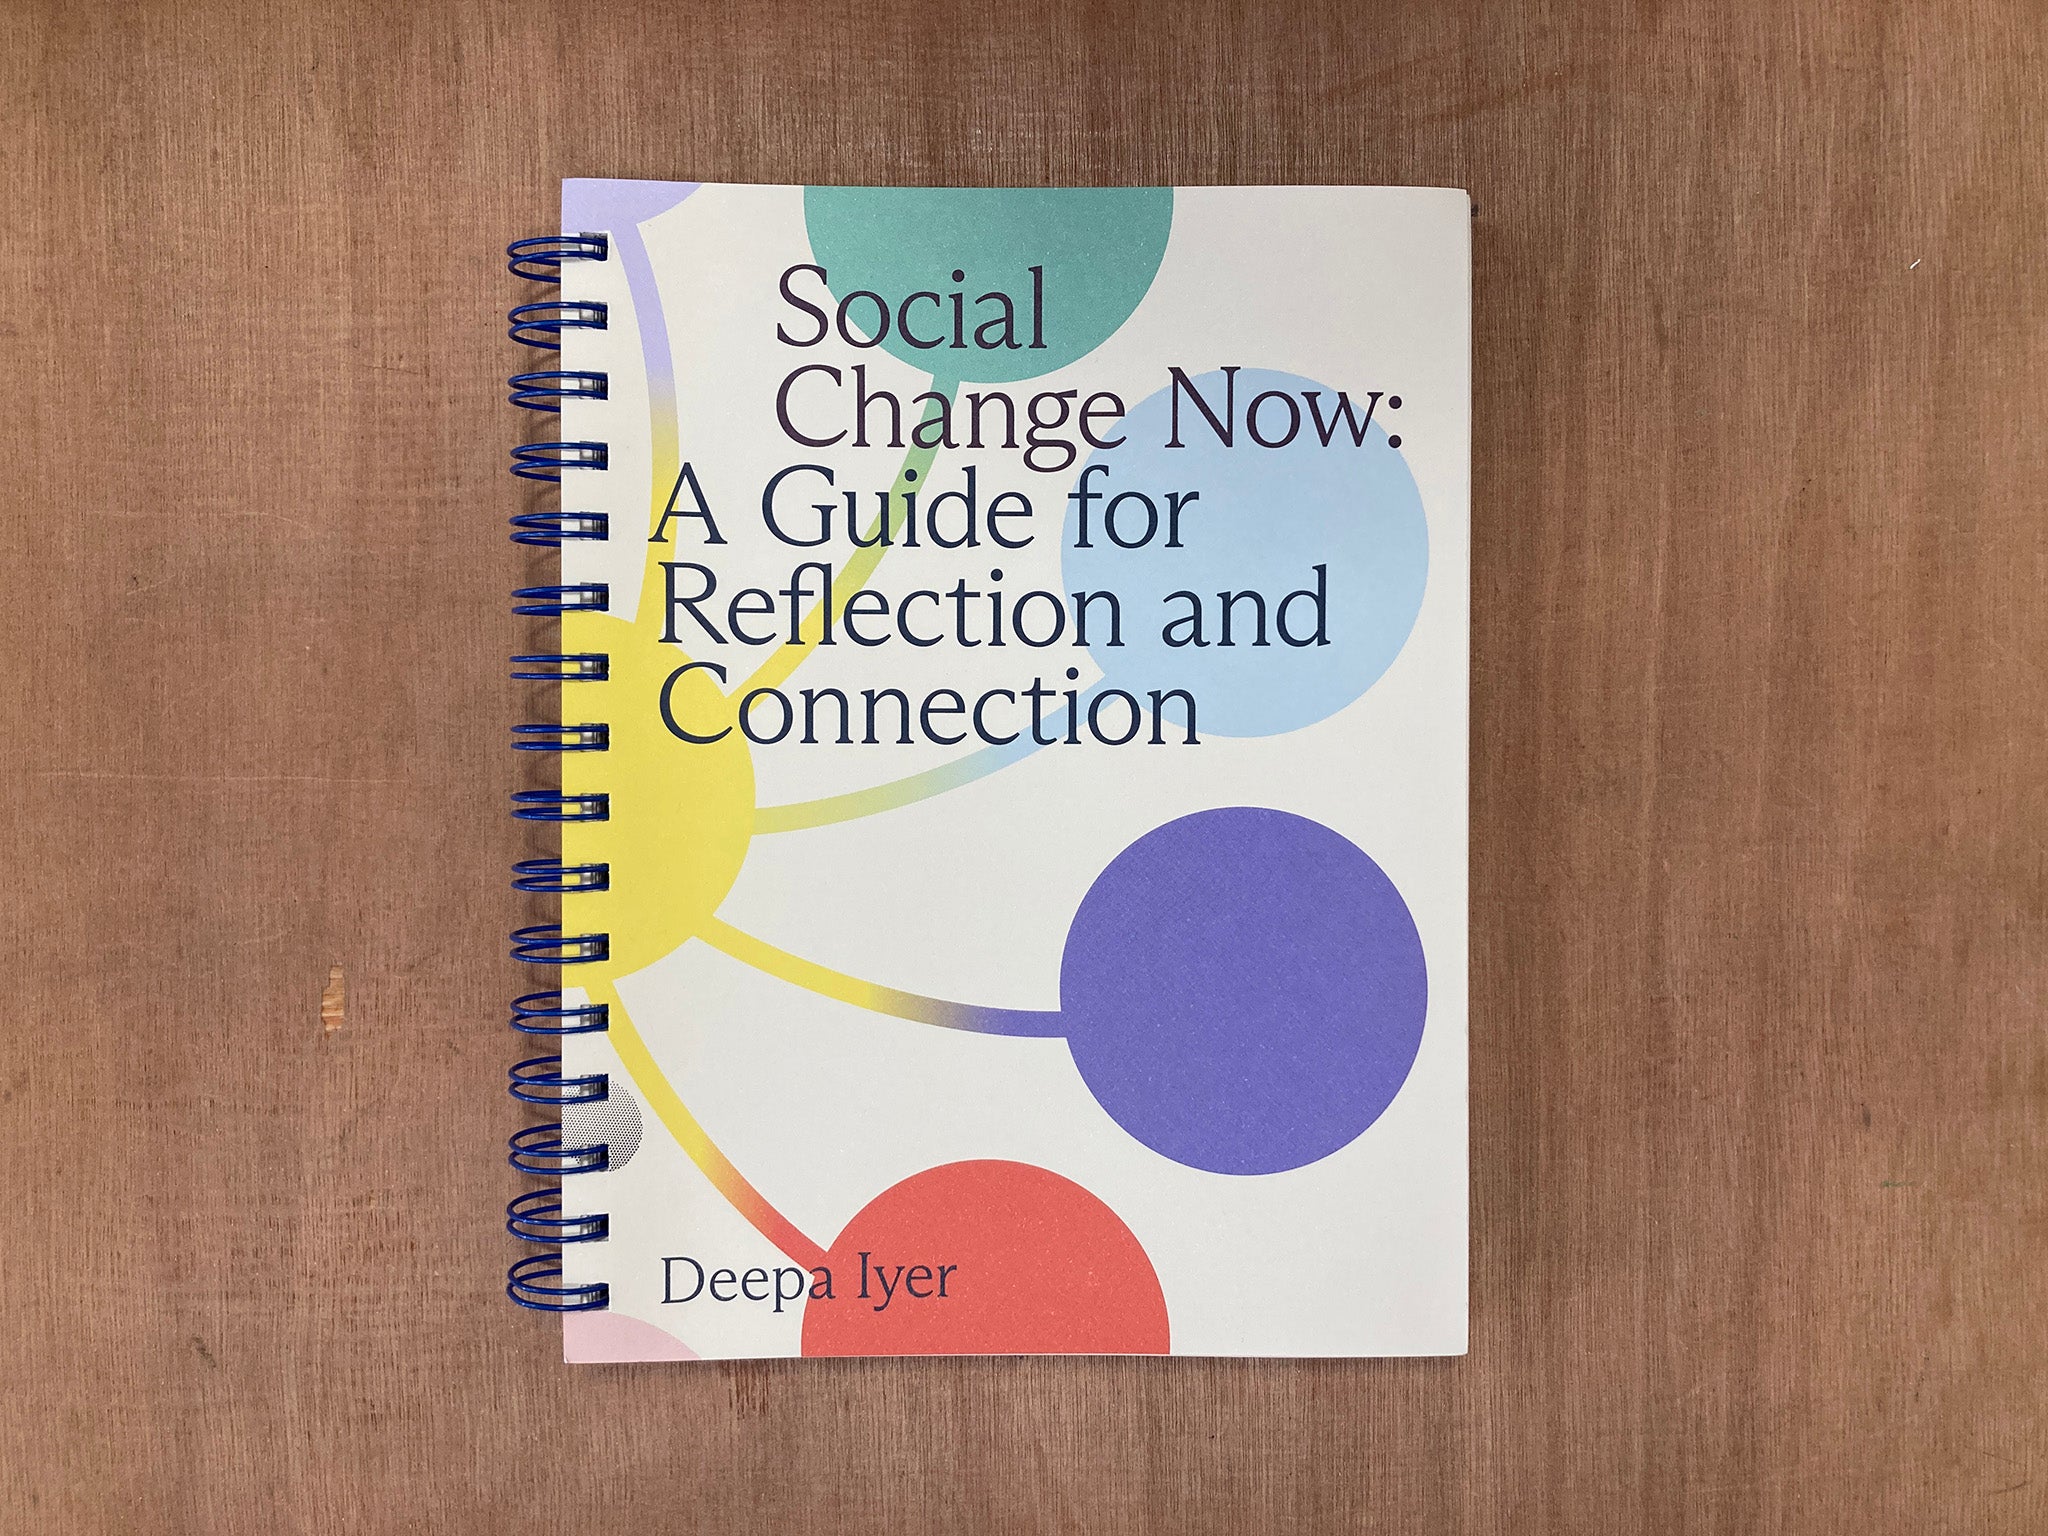 SOCIAL CHANGE NOW: A GUIDE FOR REFLECTION AND CONNECTION by Deepa Iyer